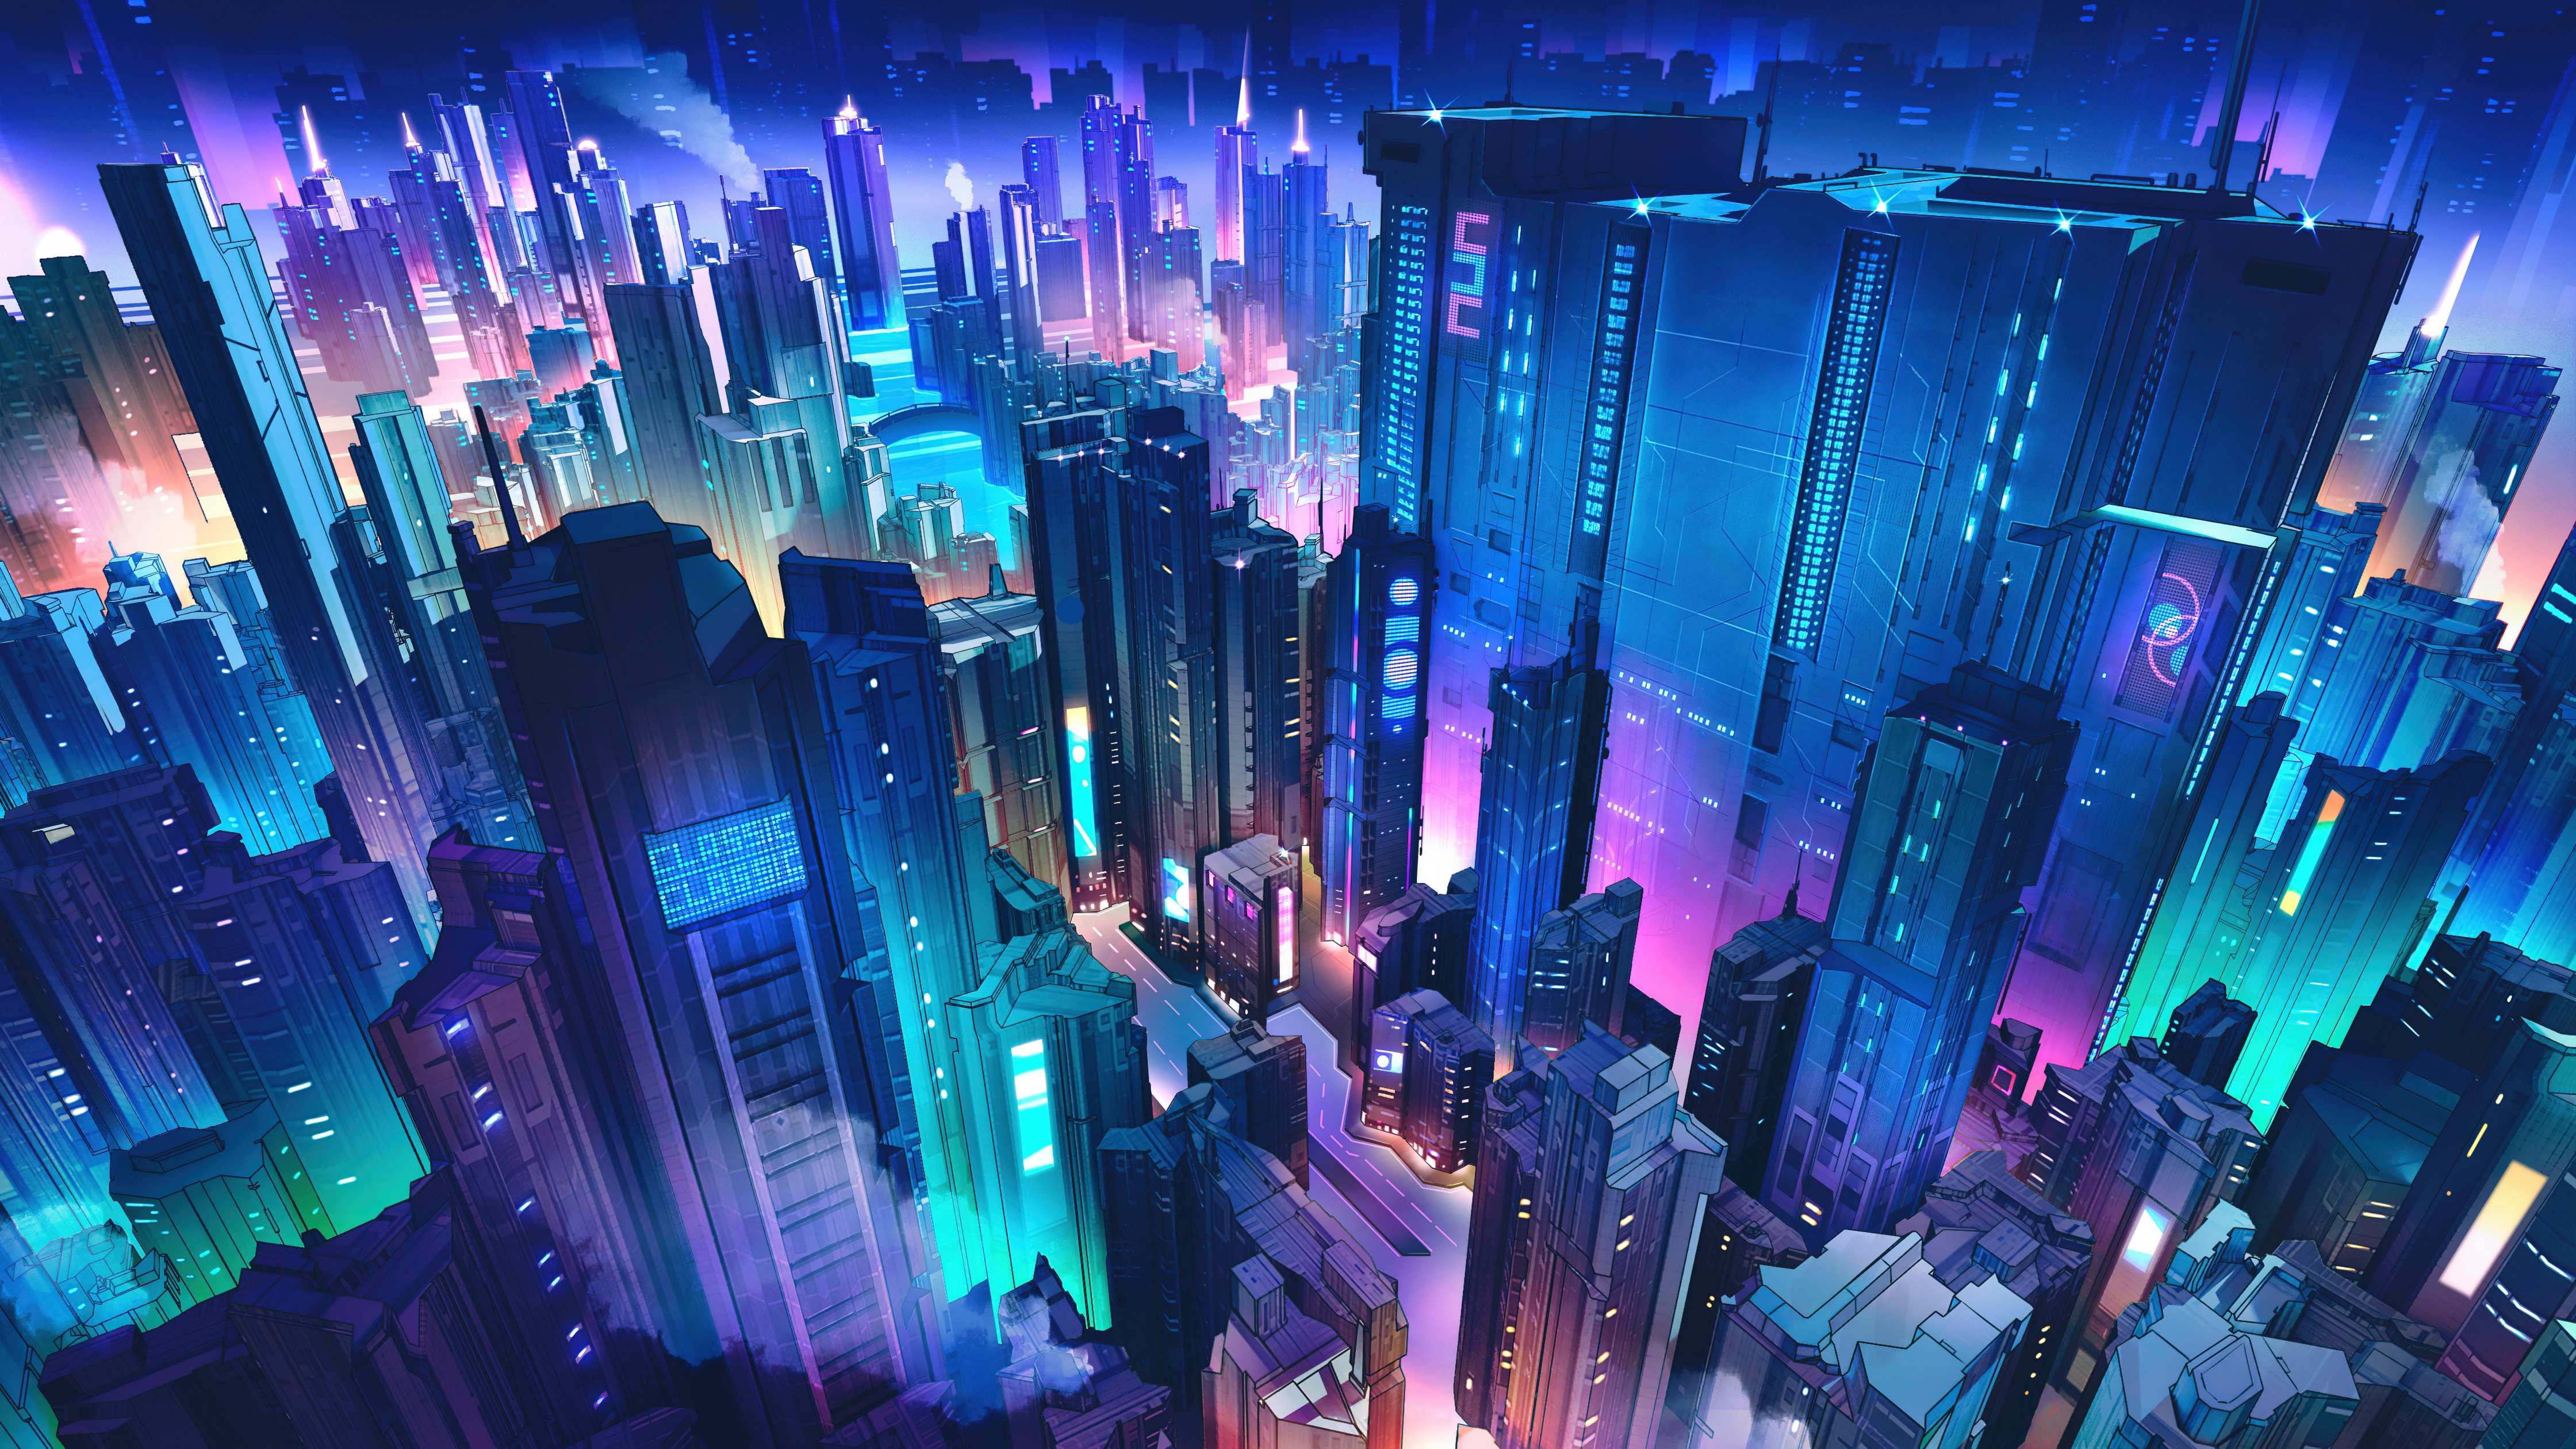 Cyber City iPhone Wallpaper  iPhone Wallpapers